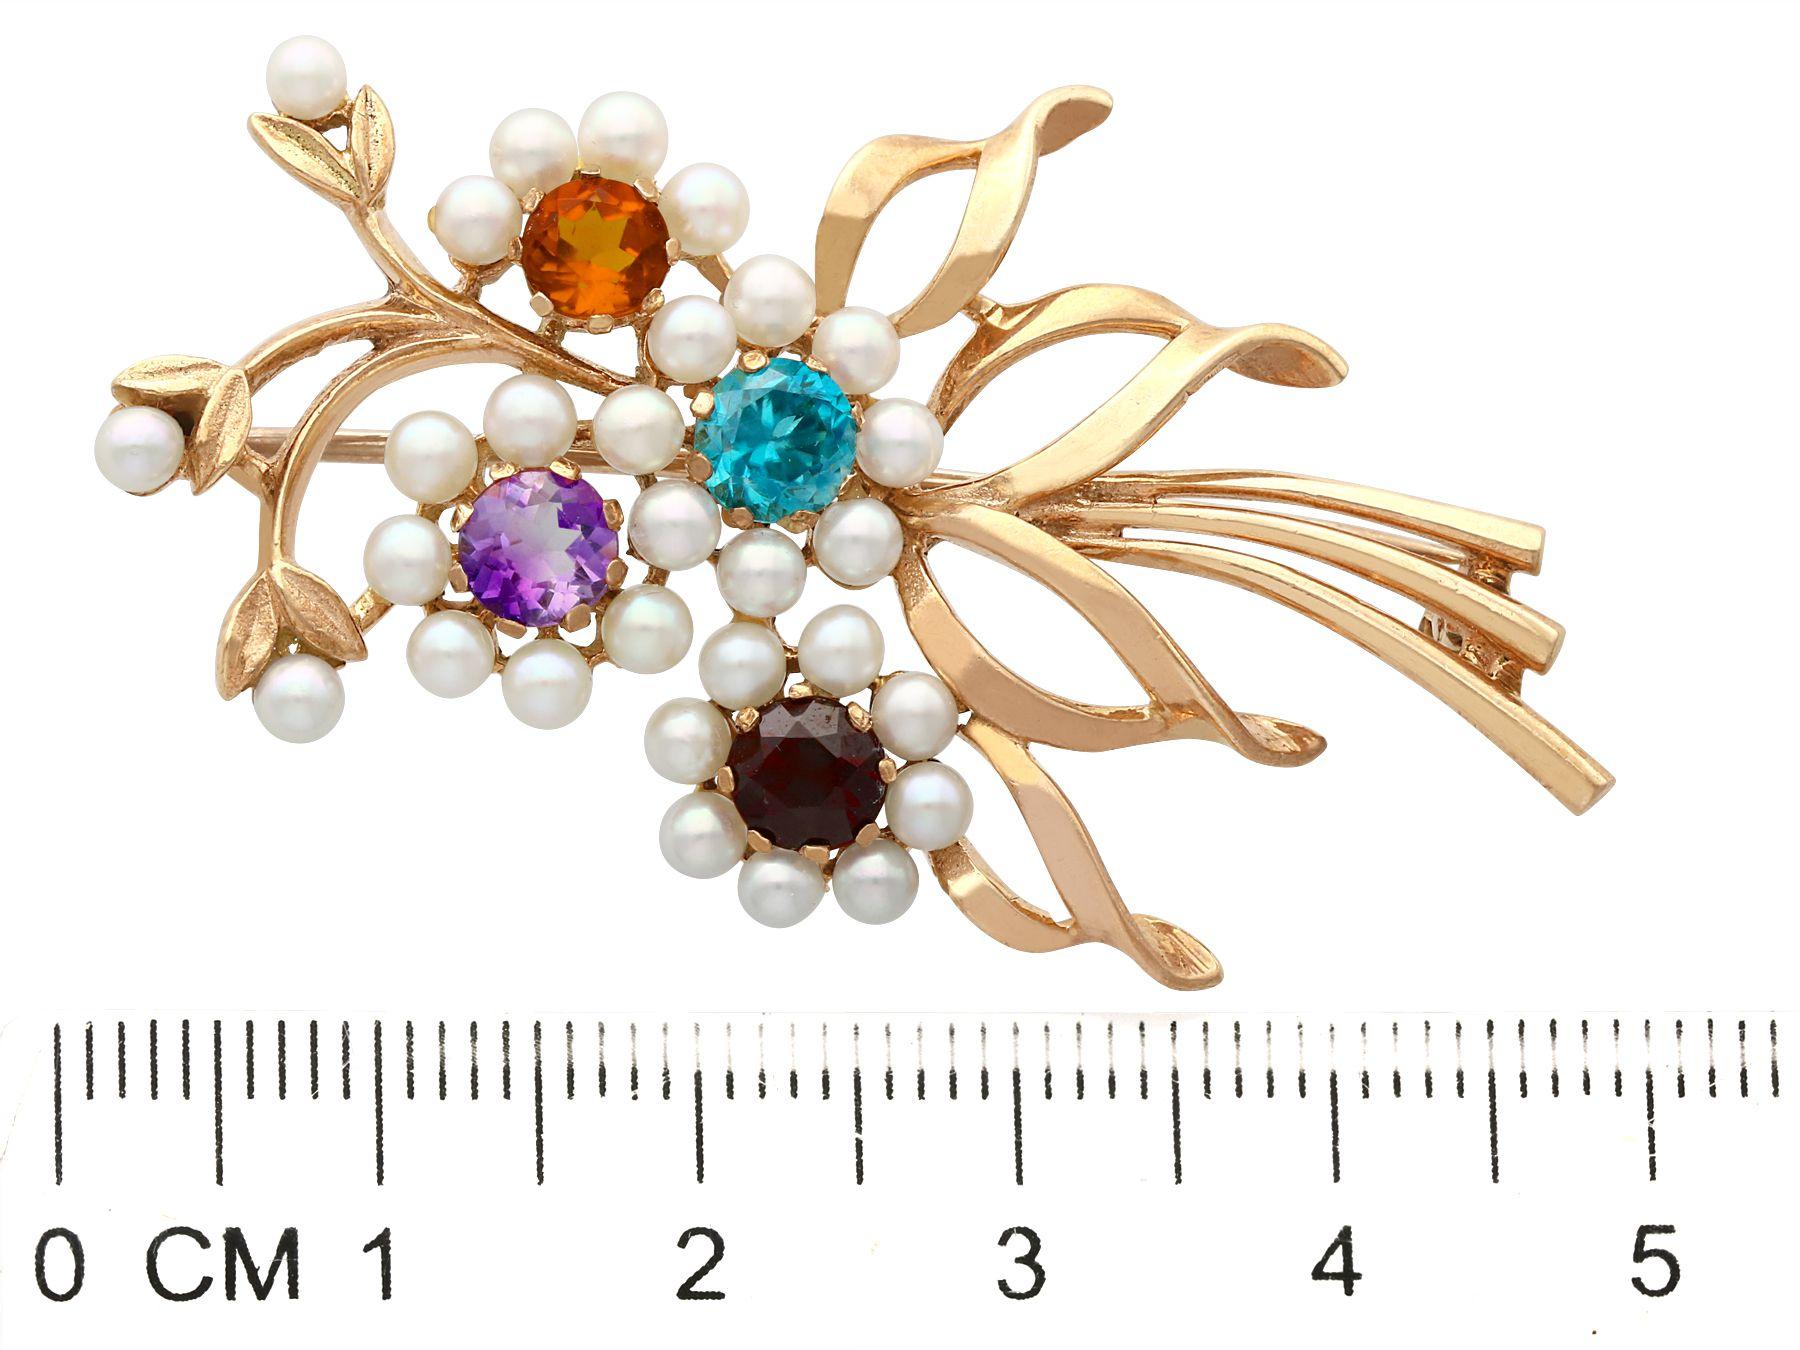 Antique 1920s 1.28 Carat Multi-Gemstone and Pearls Yellow Gold Brooch In Excellent Condition For Sale In Jesmond, Newcastle Upon Tyne